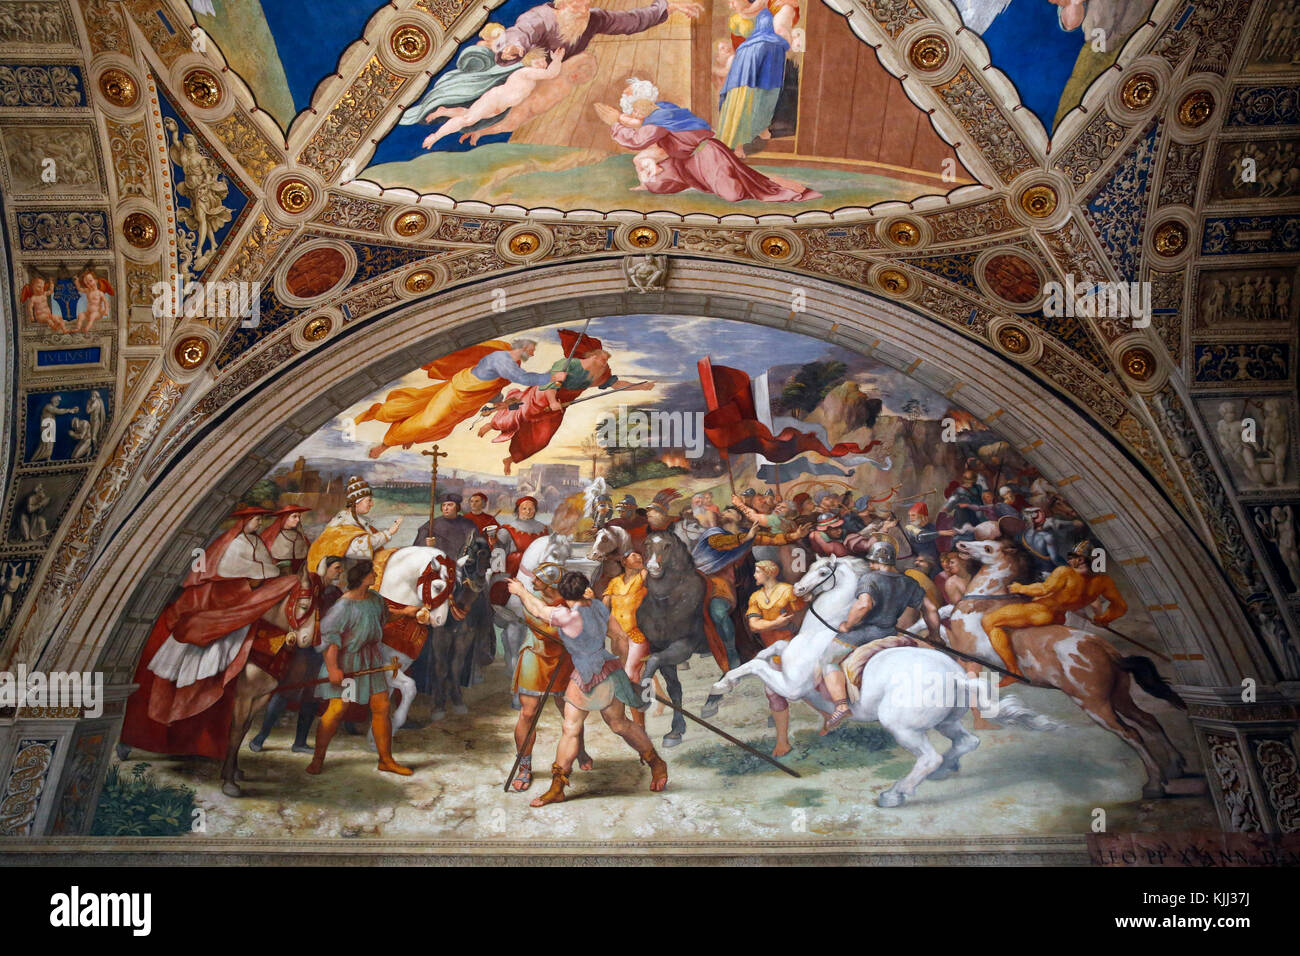 Vatican museums, Rome. Raphael's rooms. The meeting of Leo the Great and Attila. Italy. Stock Photo